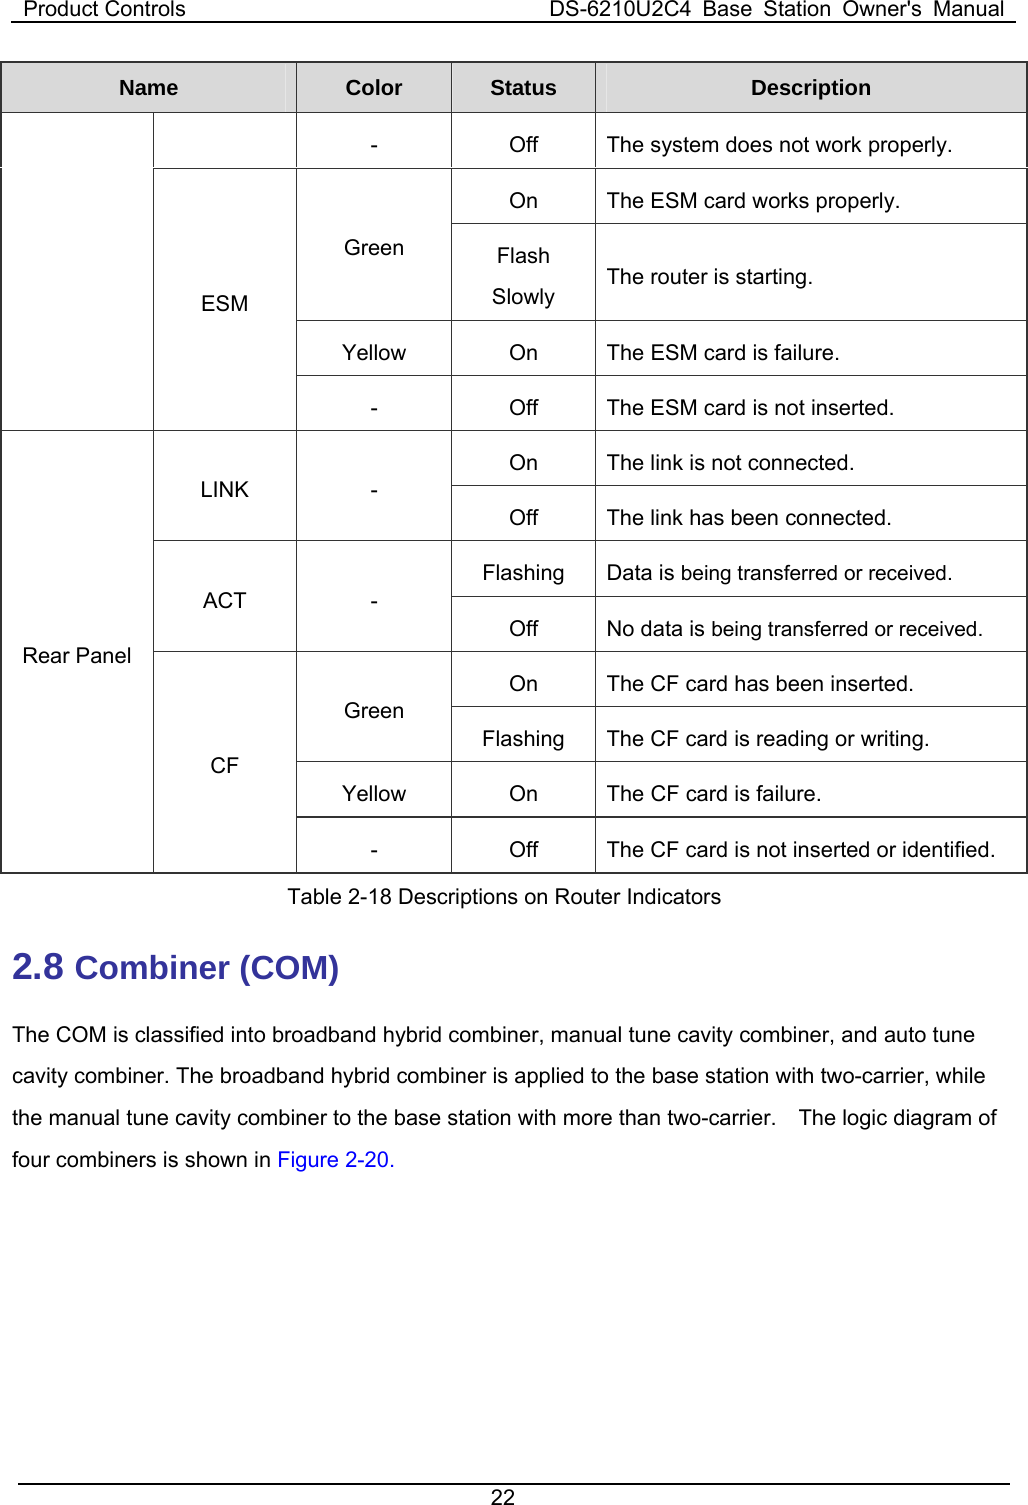 Product Controls  DS-6210U2C4 Base Station Owner&apos;s Manual 22  Name   Color  Status  Description -  Off  The system does not work properly.   On    The ESM card works properly.   Green  Flash Slowly The router is starting.   Yellow  On    The ESM card is failure.   ESM -  Off  The ESM card is not inserted.   On    The link is not connected.   LINK - Off  The link has been connected.   Flashing Data is being transferred or received.   ACT - Off  No data is being transferred or received. On    The CF card has been inserted.   Green Flashing  The CF card is reading or writing.   Yellow  On    The CF card is failure.   Rear Panel   CF -  Off  The CF card is not inserted or identified.   Table 2-18 Descriptions on Router Indicators 2.8 Combiner (COM) The COM is classified into broadband hybrid combiner, manual tune cavity combiner, and auto tune cavity combiner. The broadband hybrid combiner is applied to the base station with two-carrier, while the manual tune cavity combiner to the base station with more than two-carrier.    The logic diagram of four combiners is shown in Figure 2-20. 